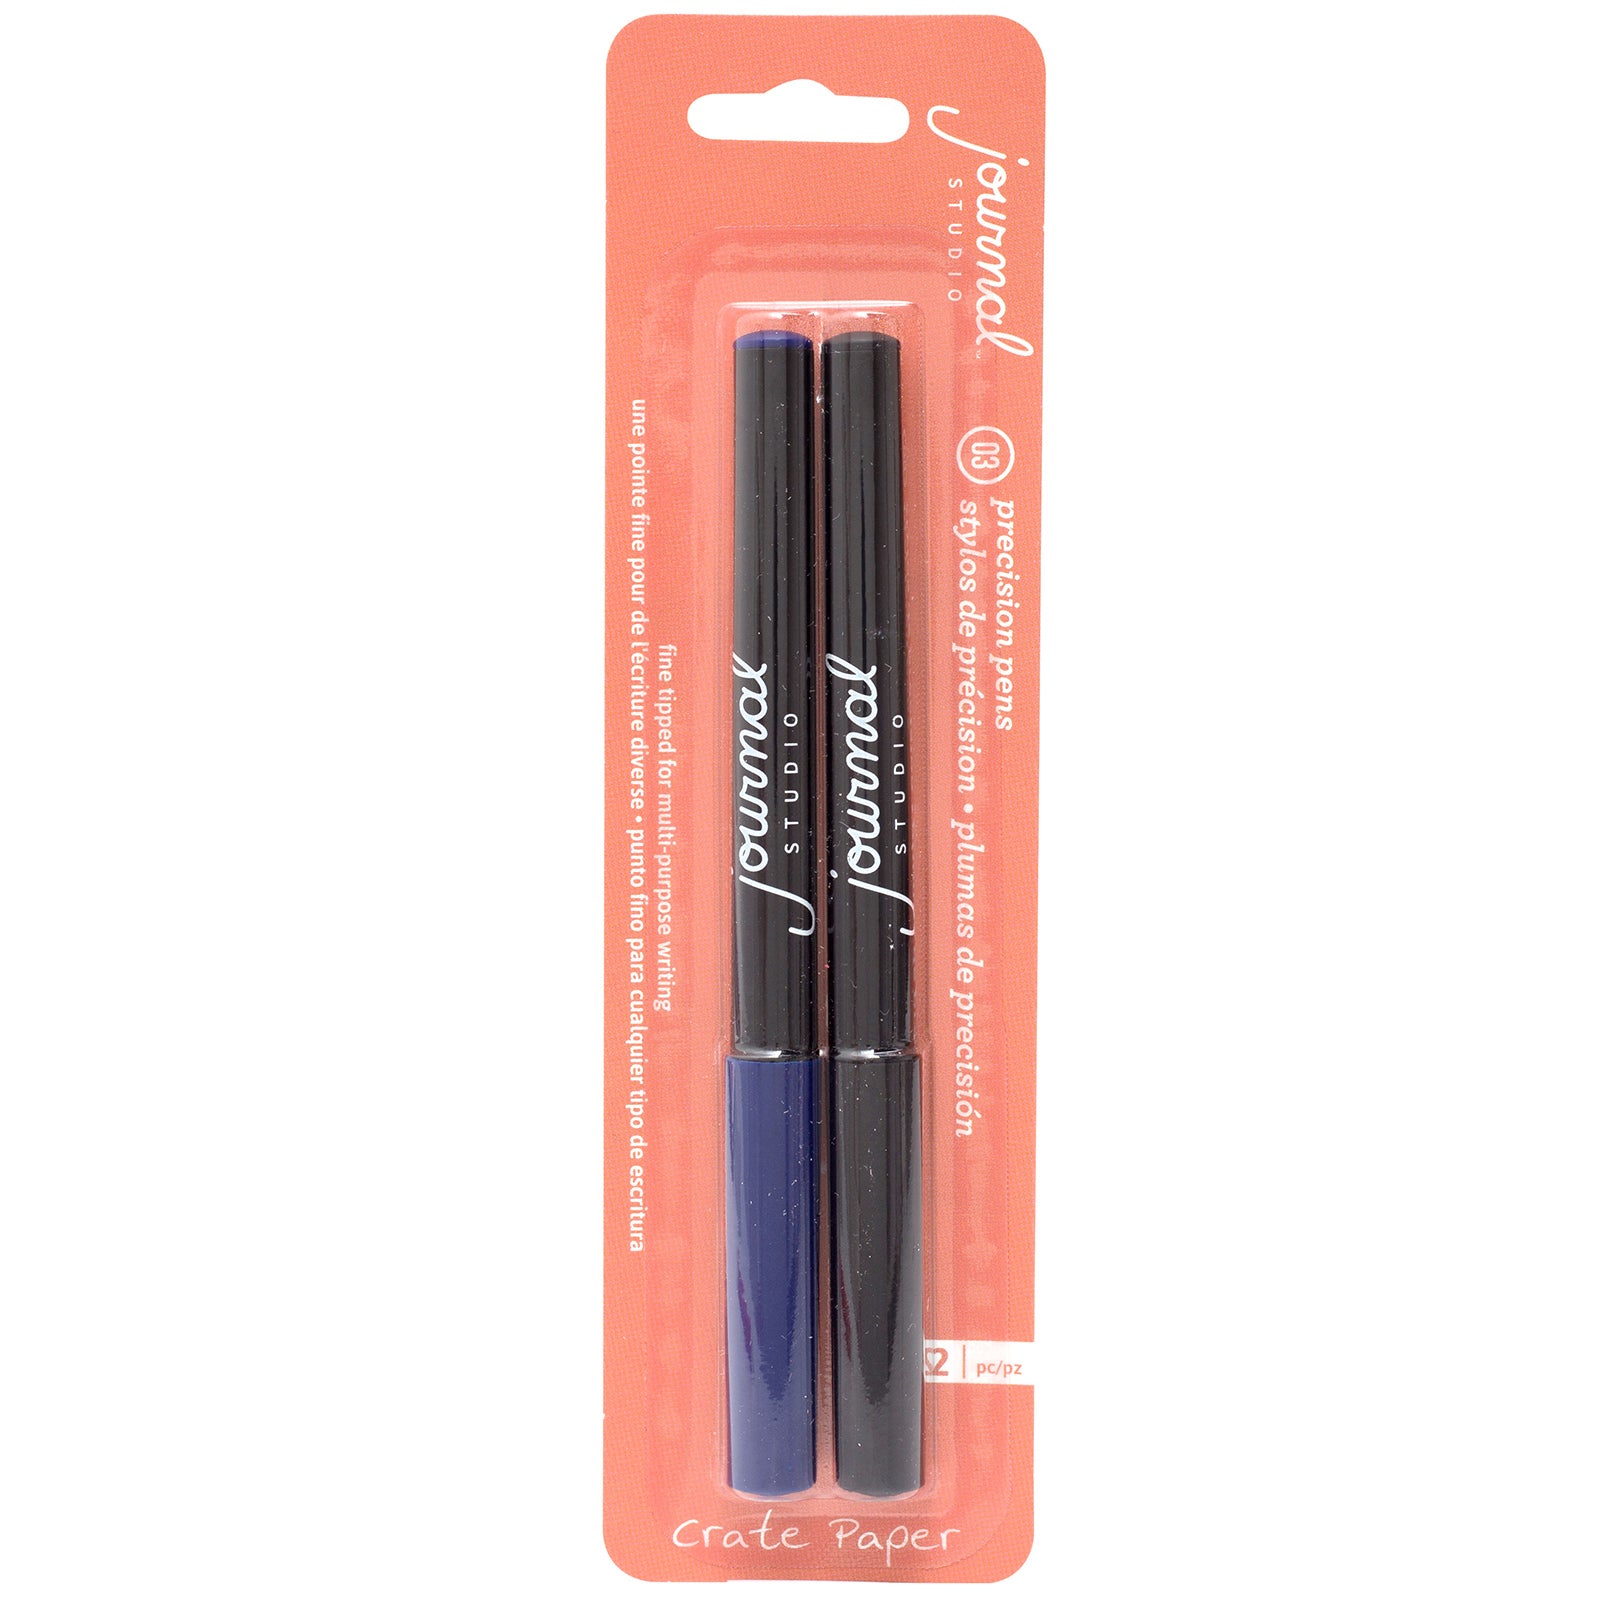 Crate Paper Journal Studio 03 Journaling Pens - 2 pack - Blue and Black